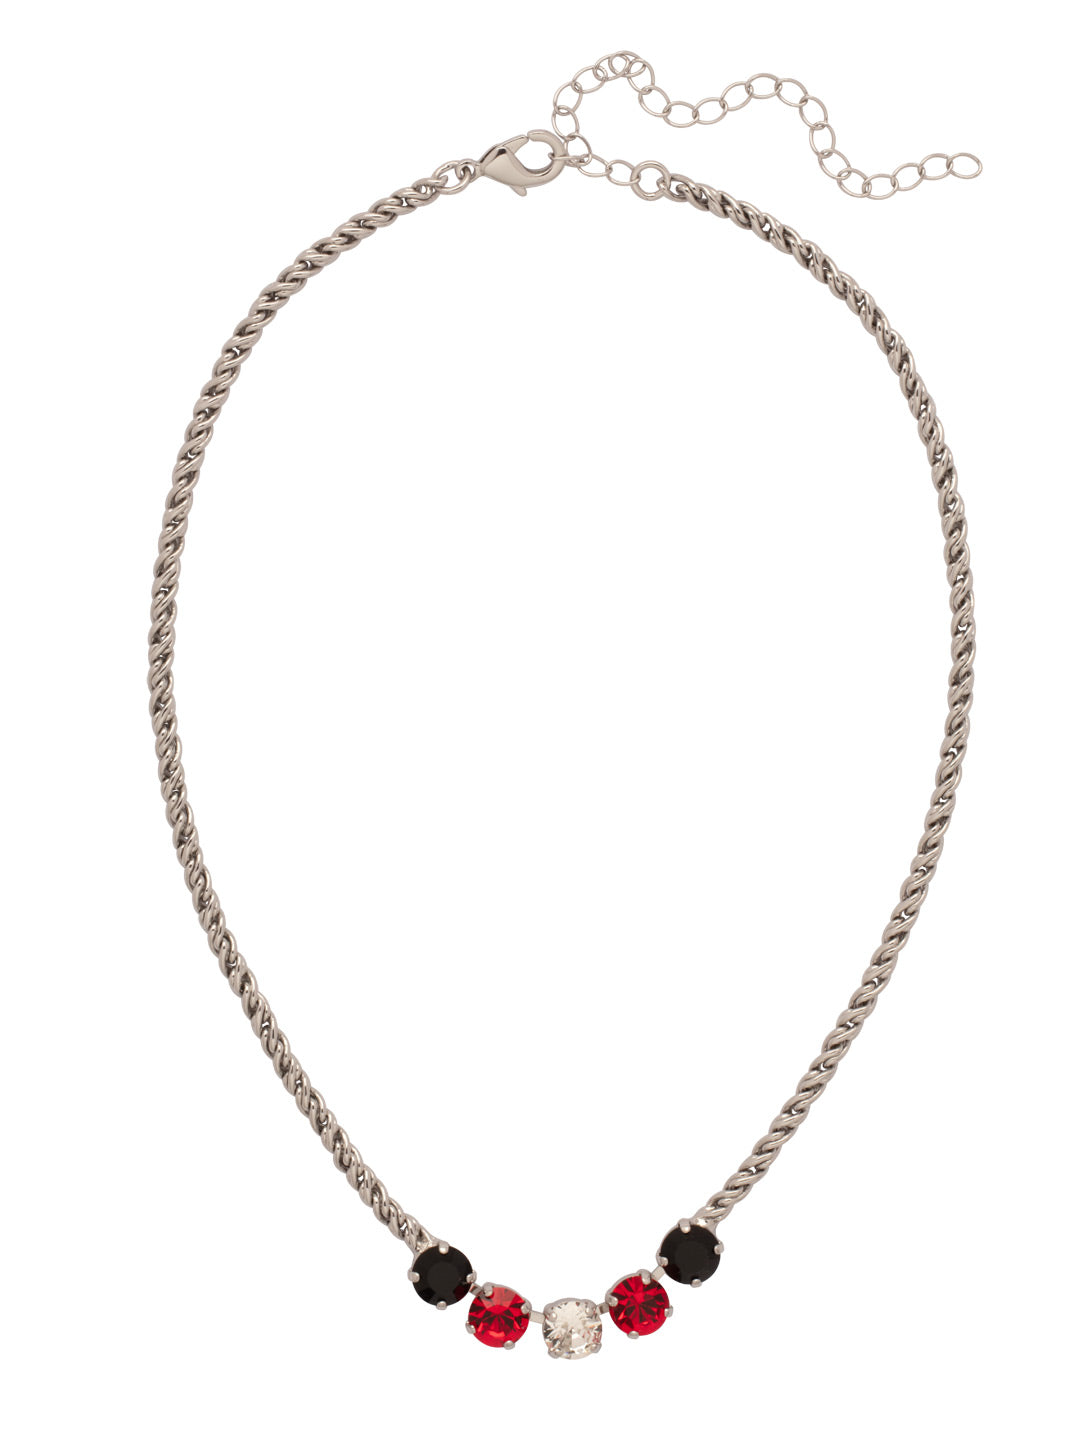 Shannon Tennis Necklace - NFL1PDGDAR - <p>The Shannon Tennis Necklace features a line of five round cut crystals on an adjustable rope chain, secured by a lobster claw clasp. From Sorrelli's Game Day Red collection in our Palladium finish.</p>